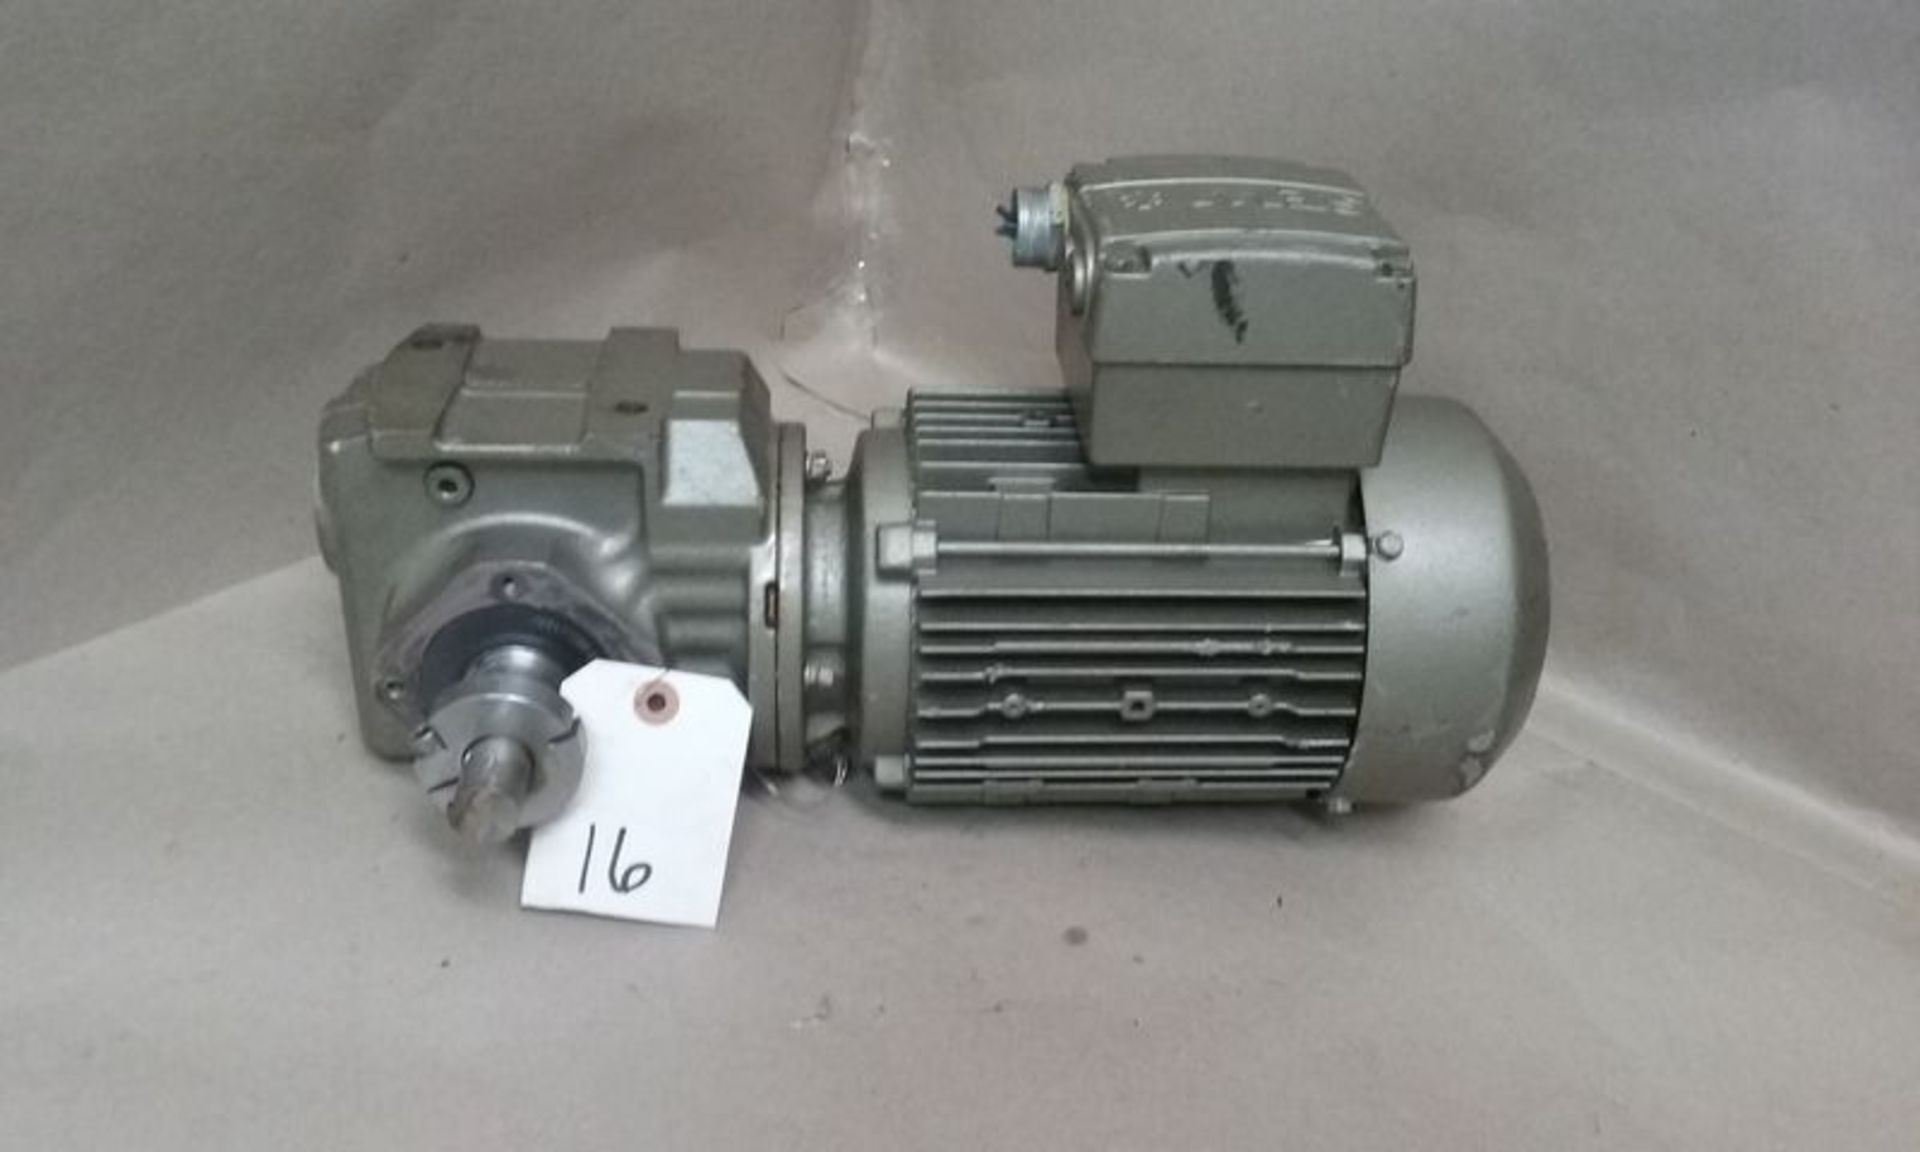 SEW EURODRIVE 1 HP RIGHT ANGLE GEAR DRIVE - Image 5 of 6